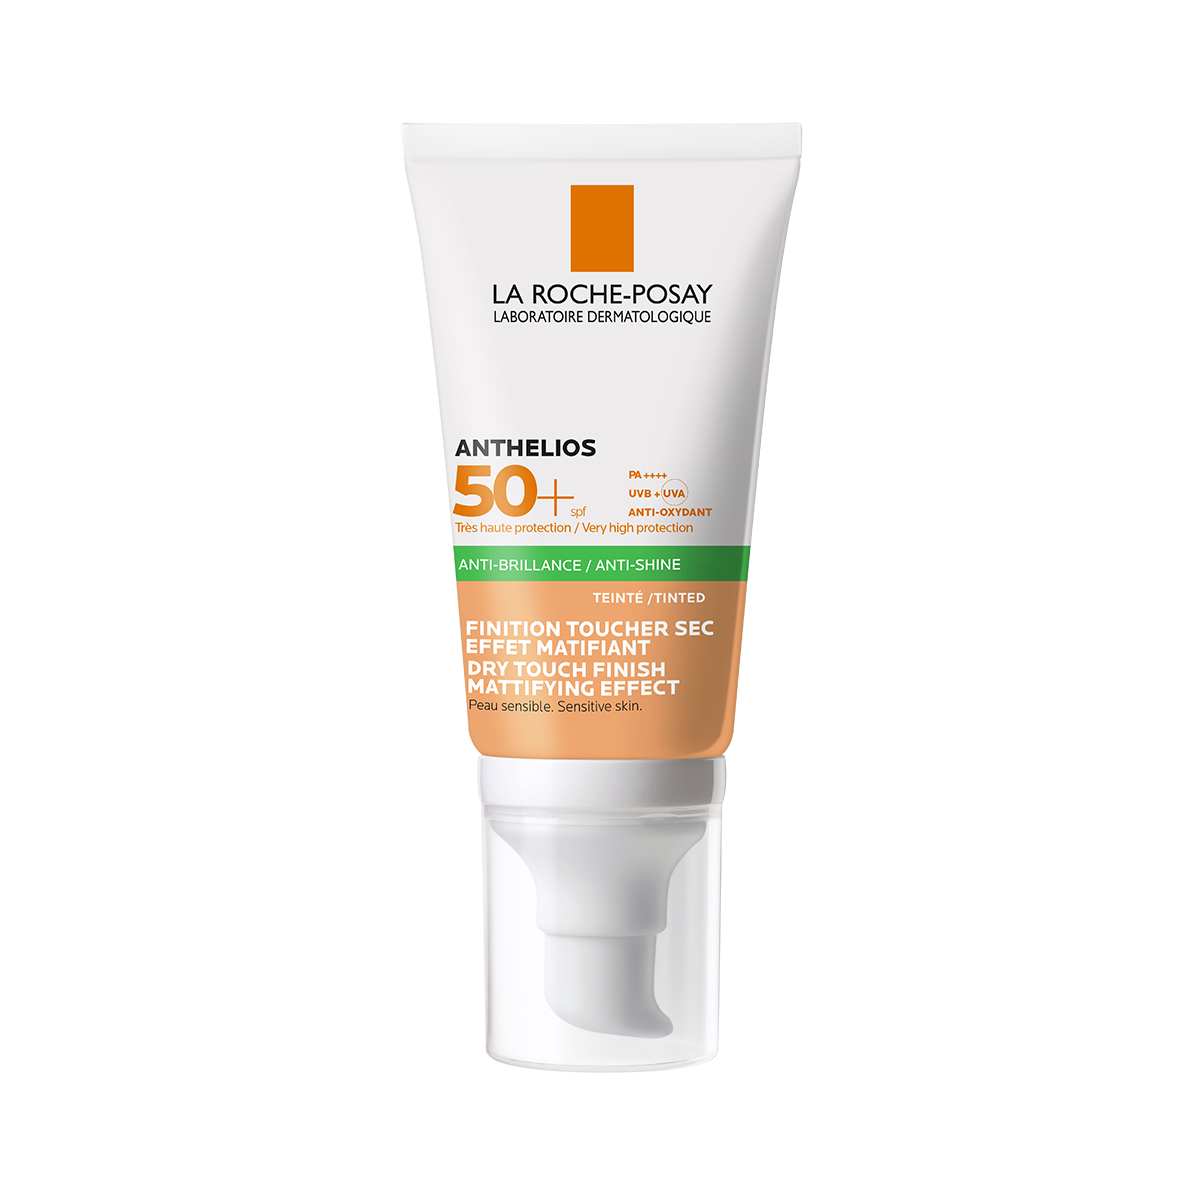 ANTHELIOS XL TINTED DRY TOUCH SPF50+ ΑΝΤΗΛΙΑΚΗ ΜΕ ΧΡΩΜΑ ΓΙΑ ΜΑΤ ΑΠΟΤΕΛΕΣΜΑ